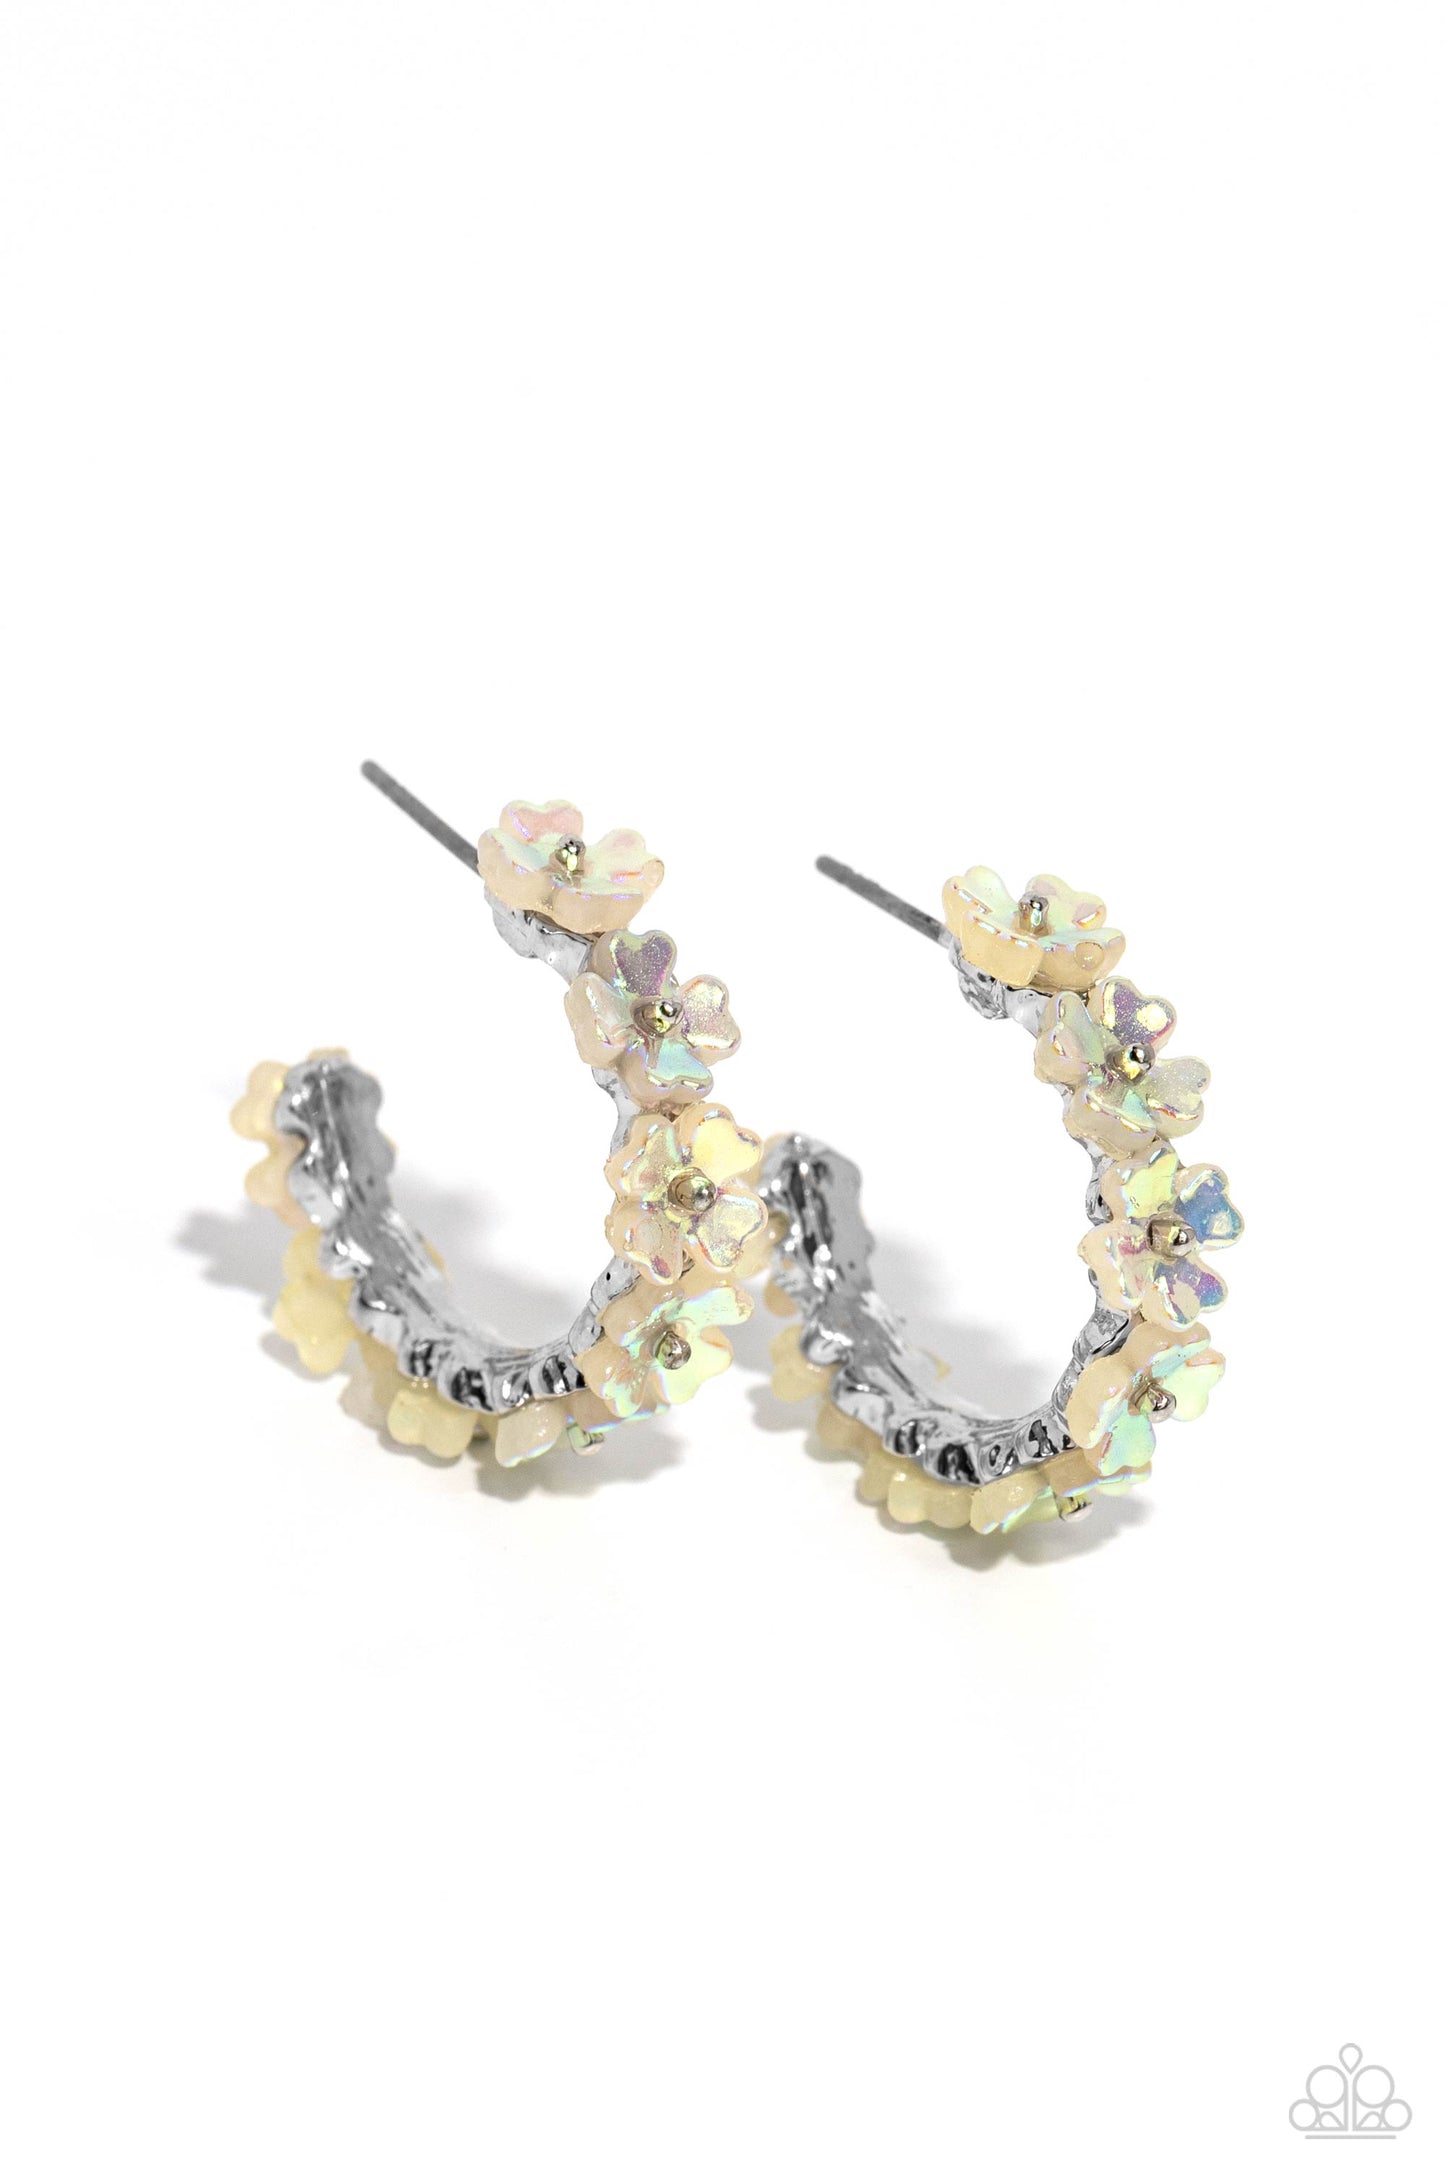 Paparazzi Accessories - Floral Focus - White Earrings tiny white iridescent flowers connect to one another as they wrap around the ear to create a charming, dainty hoop. Earring attaches to a standard post fitting. Hoop measures approximately 3/4" in diameter. Due to its prismatic palette, color may vary. Sold as one pair of hoop earrings.